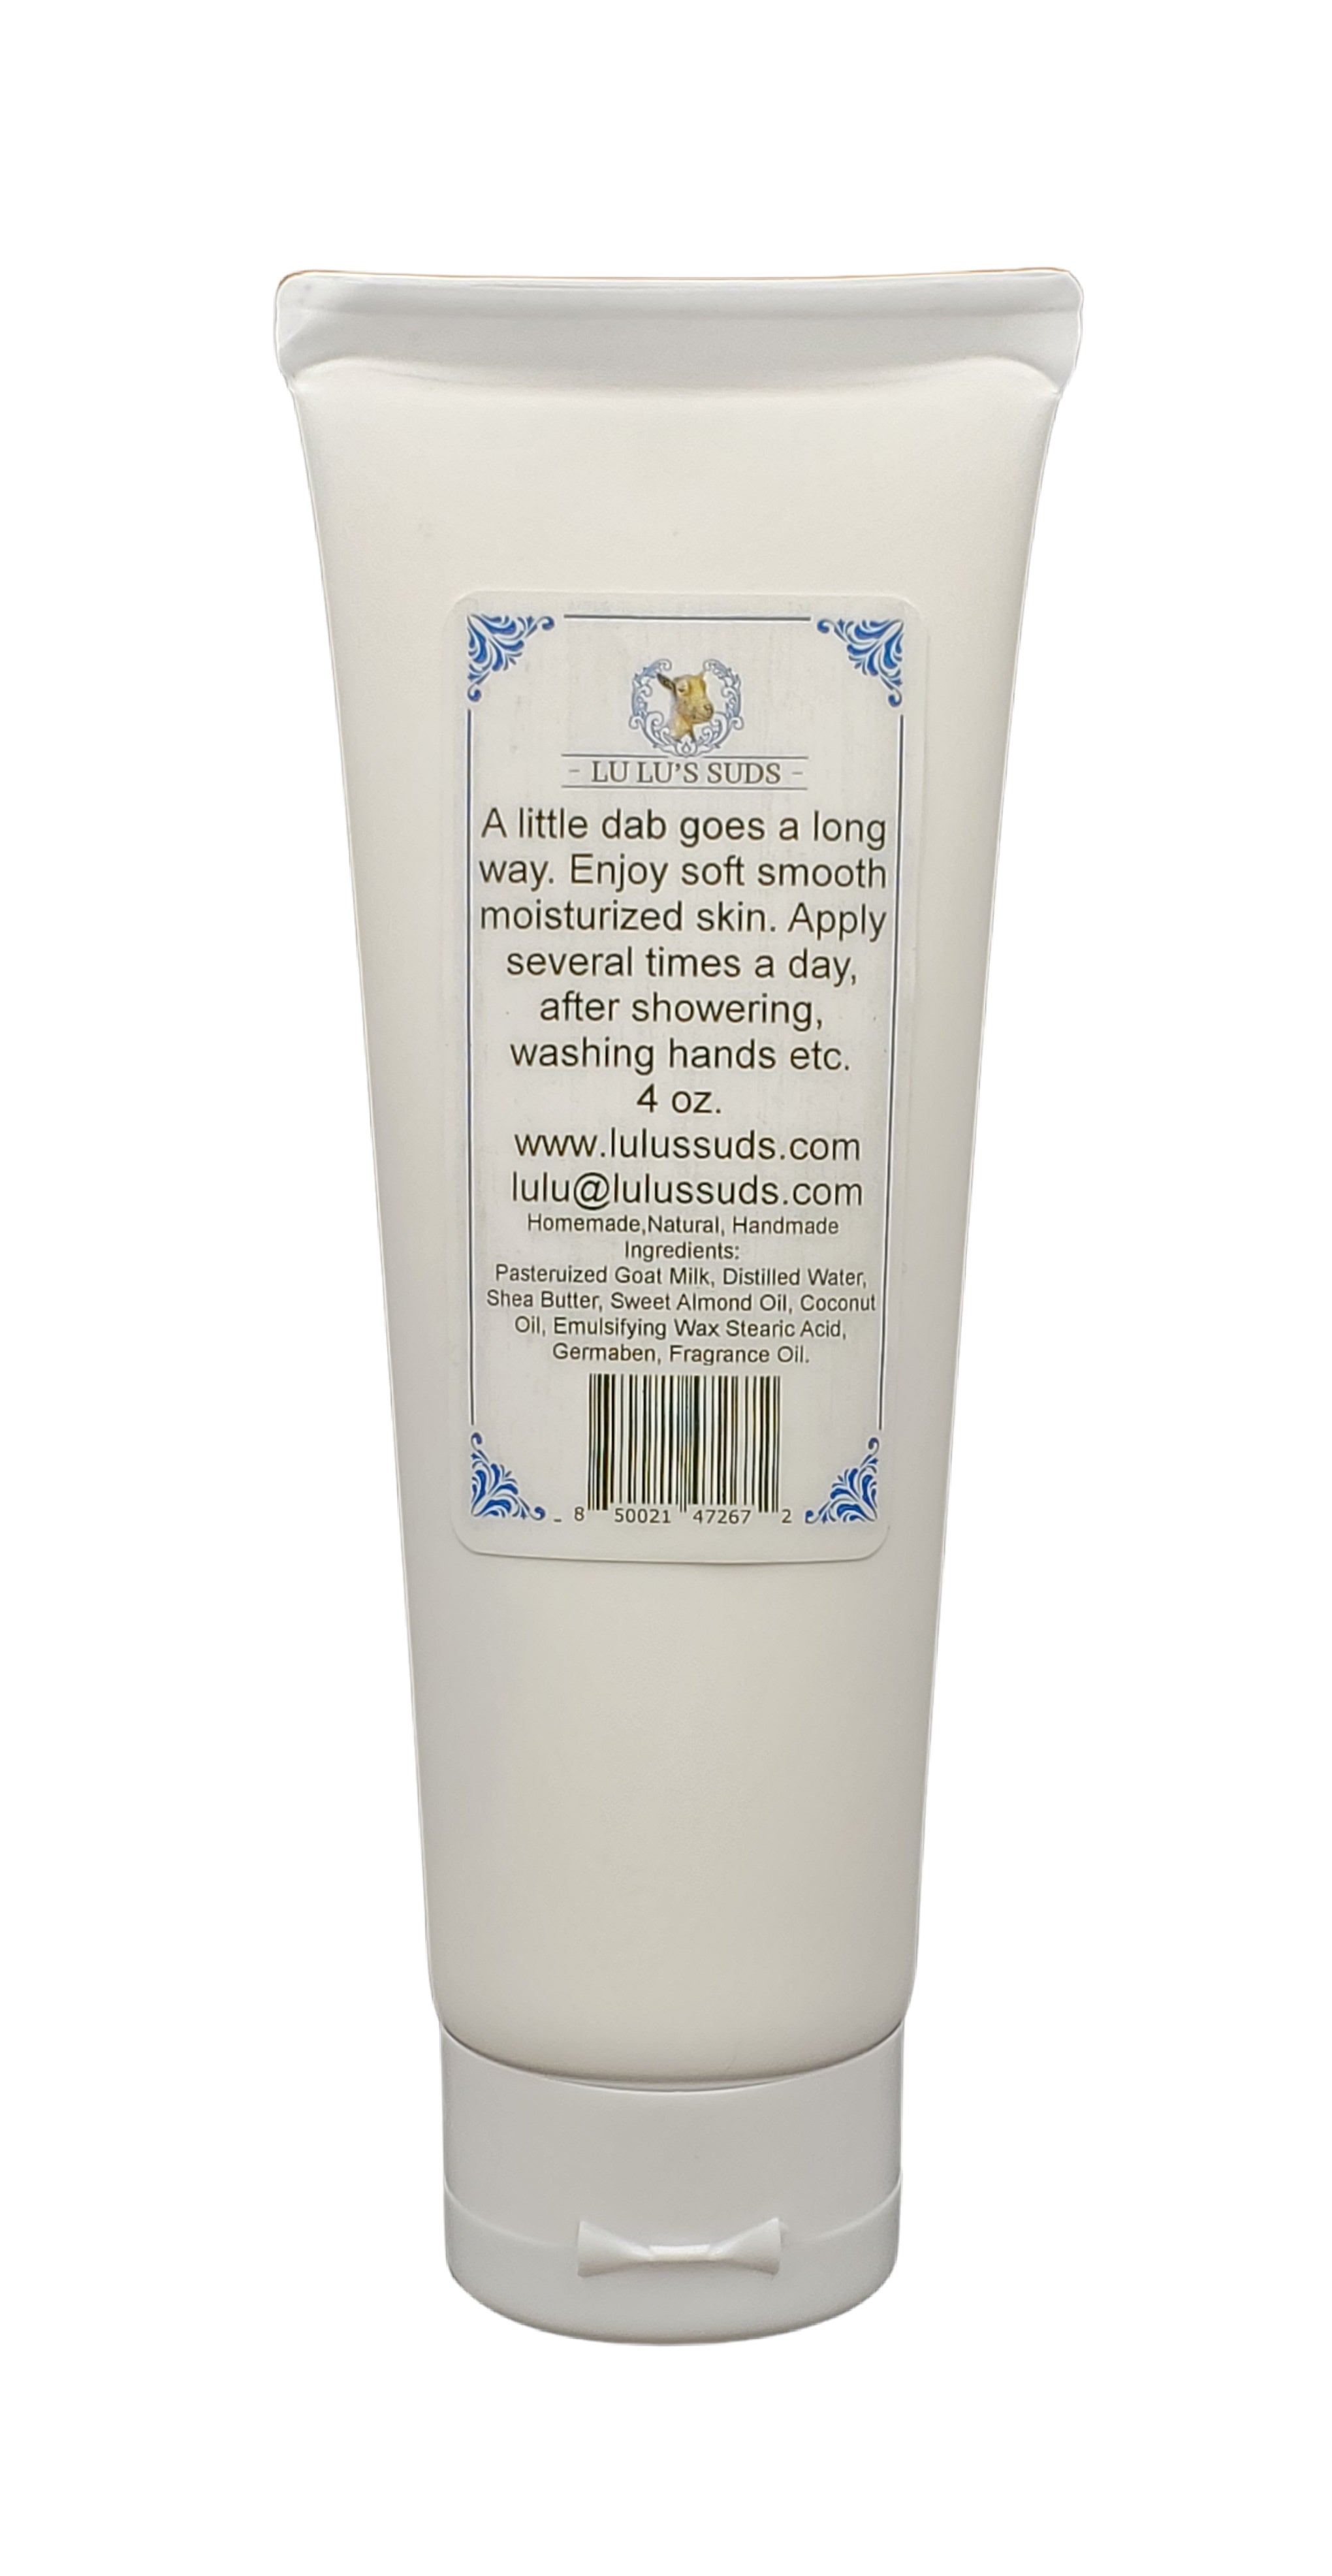 Nick's Cool Water Goat Milk Lotion 4 oz.